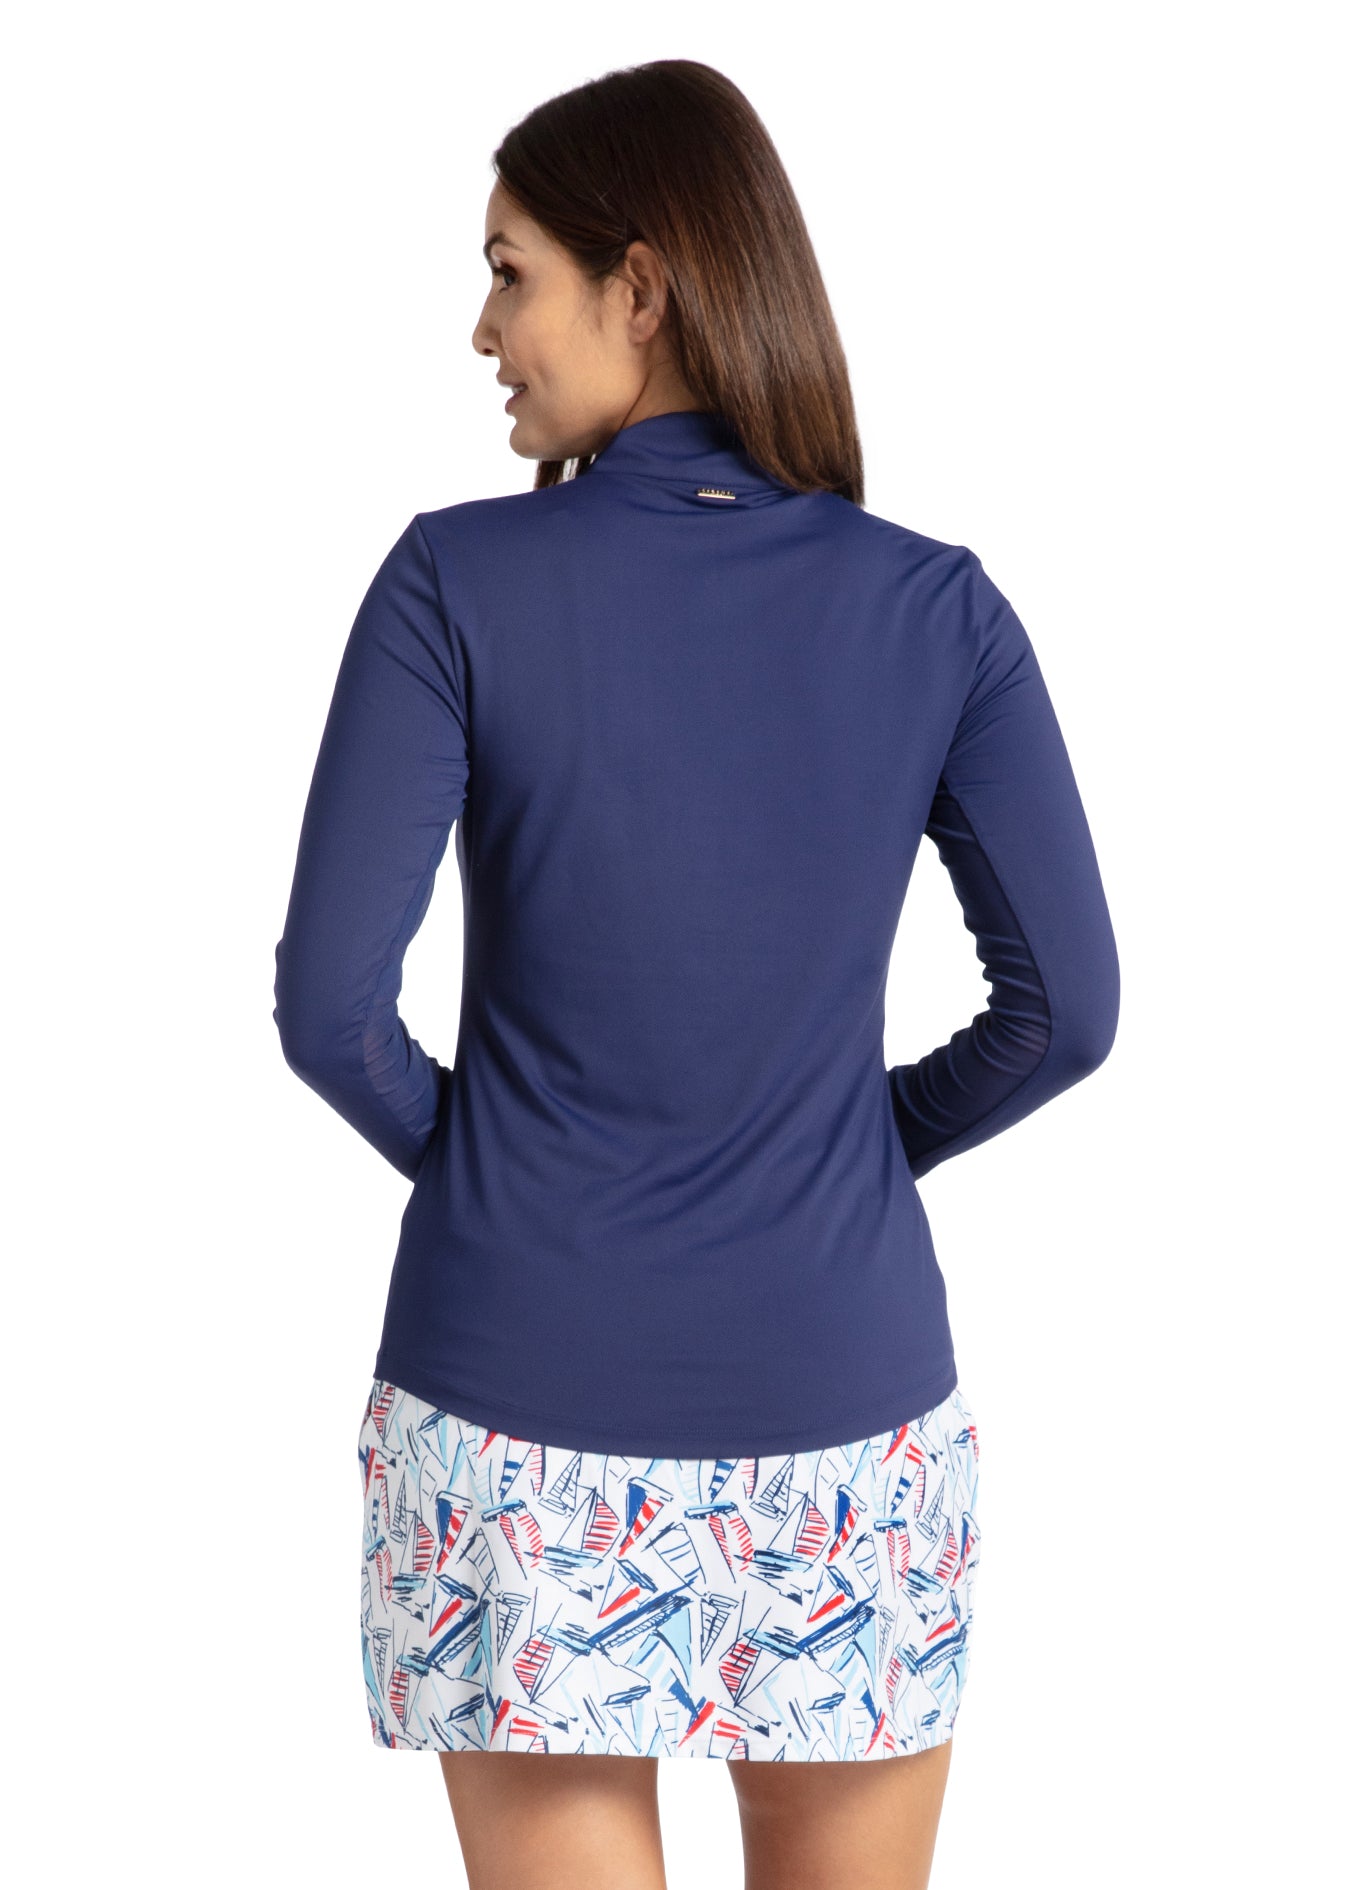 Woman modeling back of Sailboat Medium Length Skort and Navy Sport Zip Polo on boat.